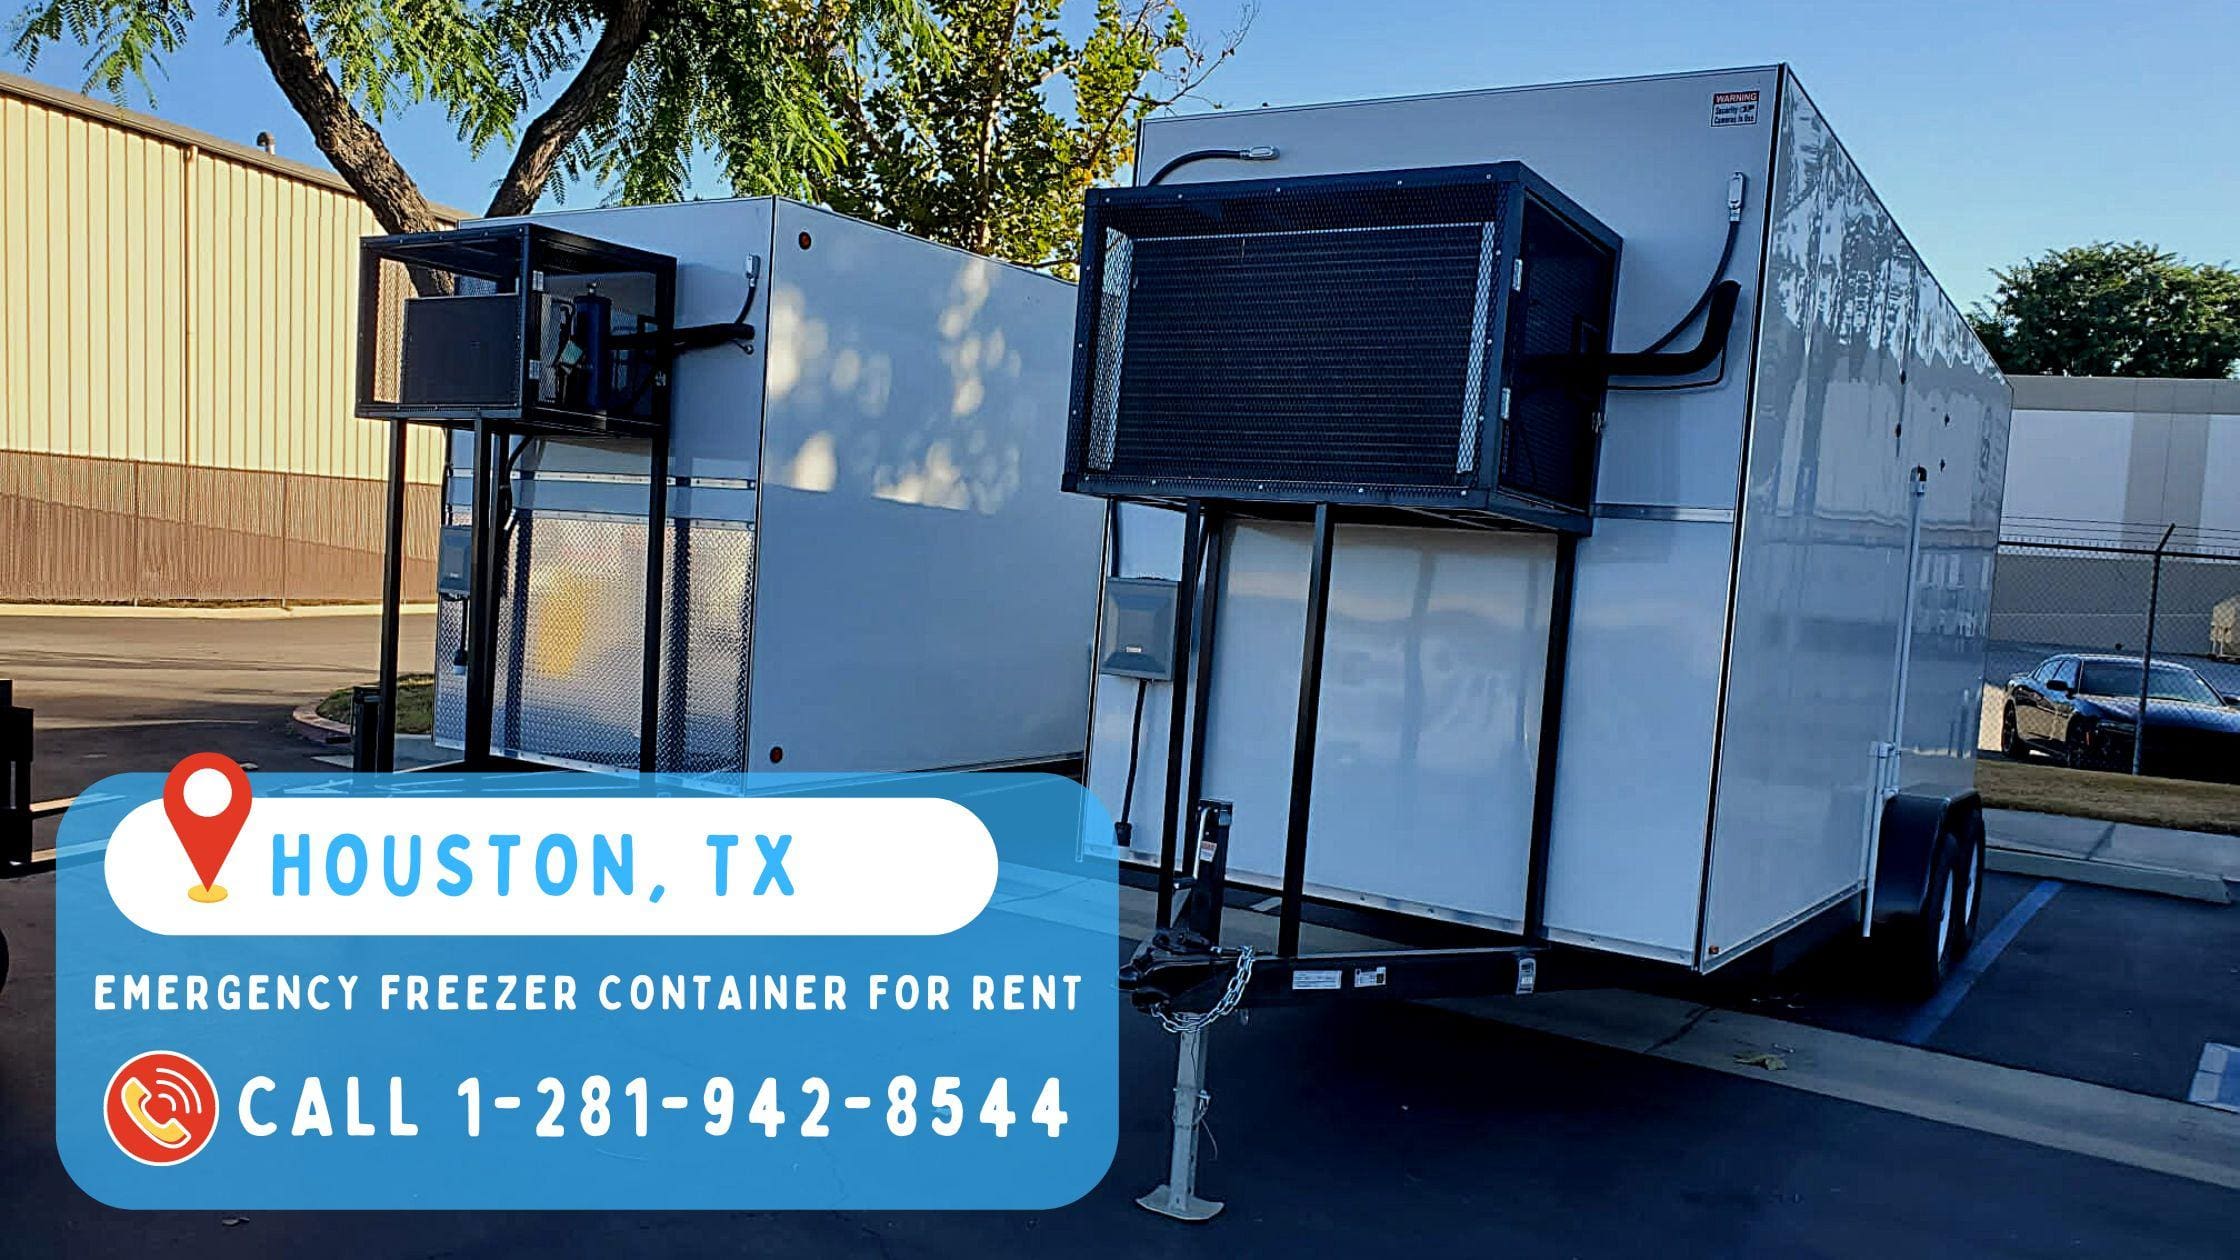 Emergency Freezer Container for Rent in Houston